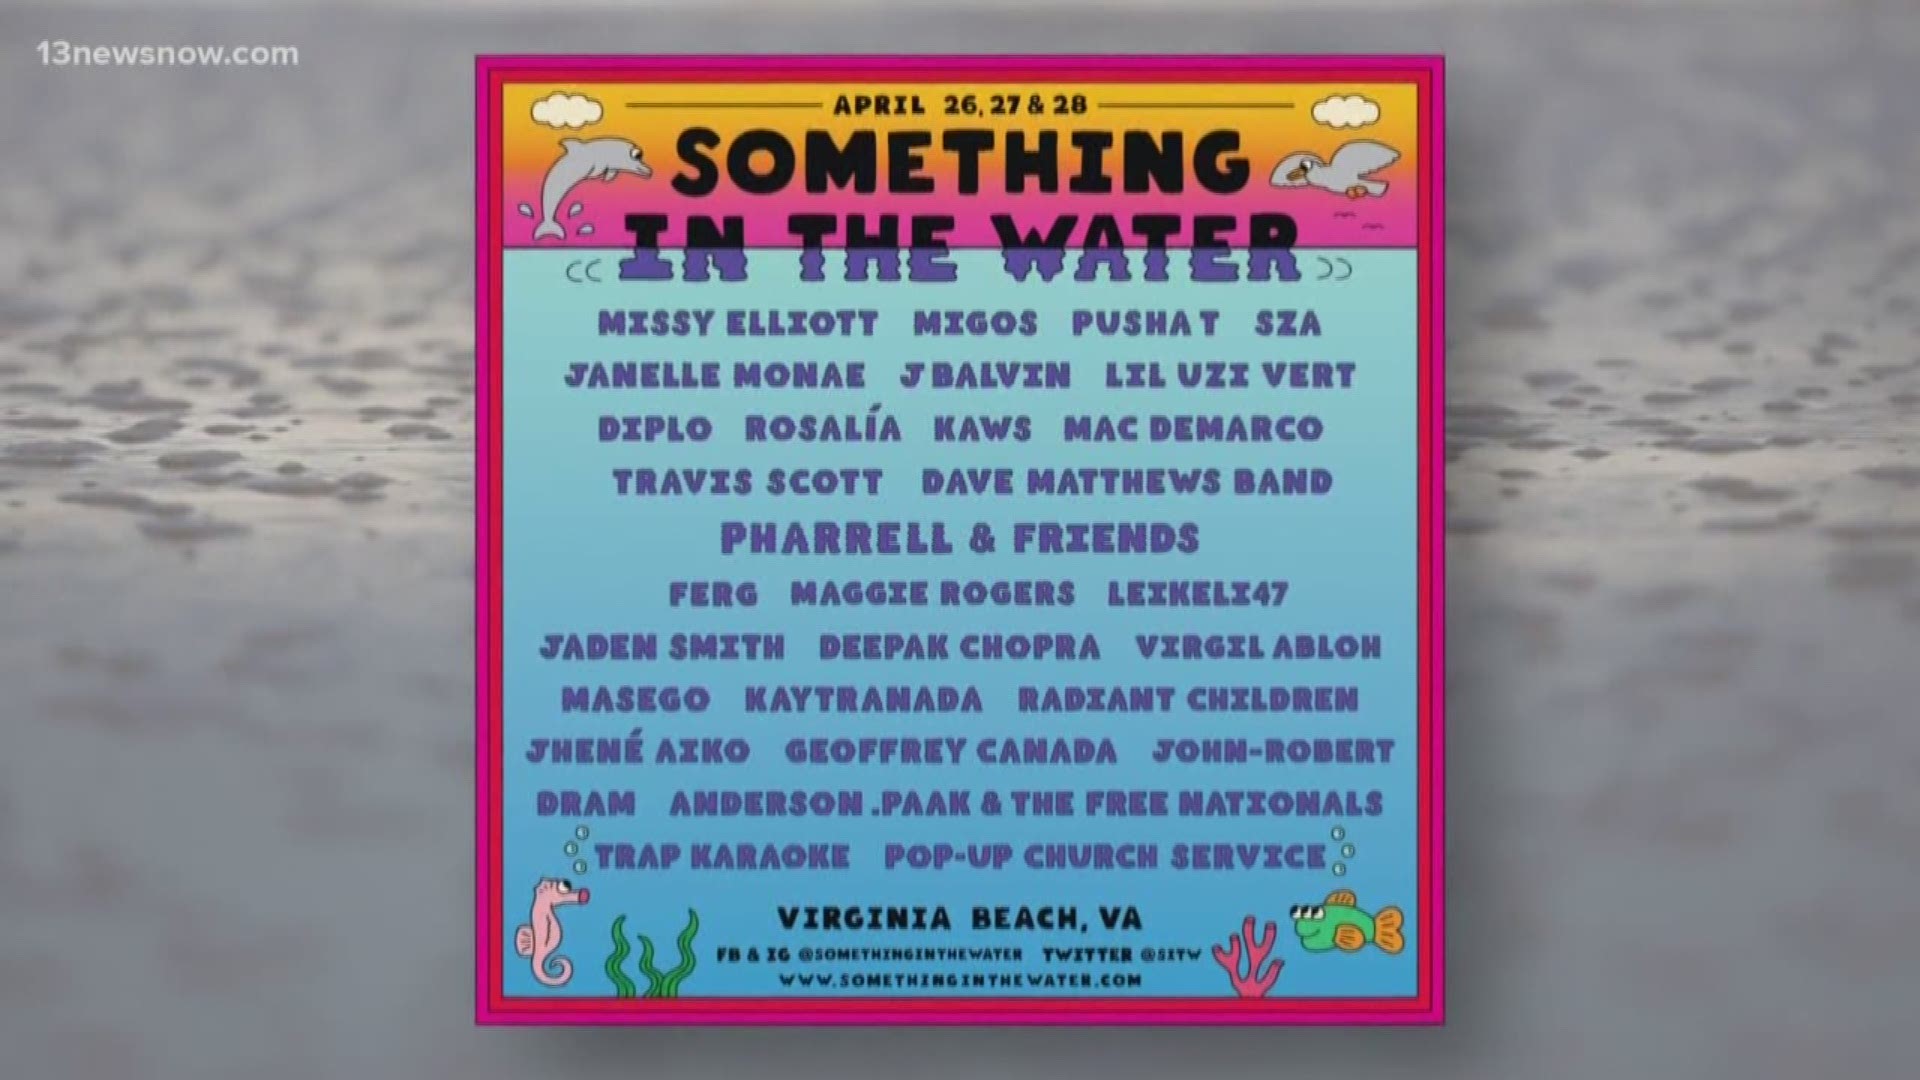 The newly released "Something in the Water" lineup has college students excited for three-day festival.